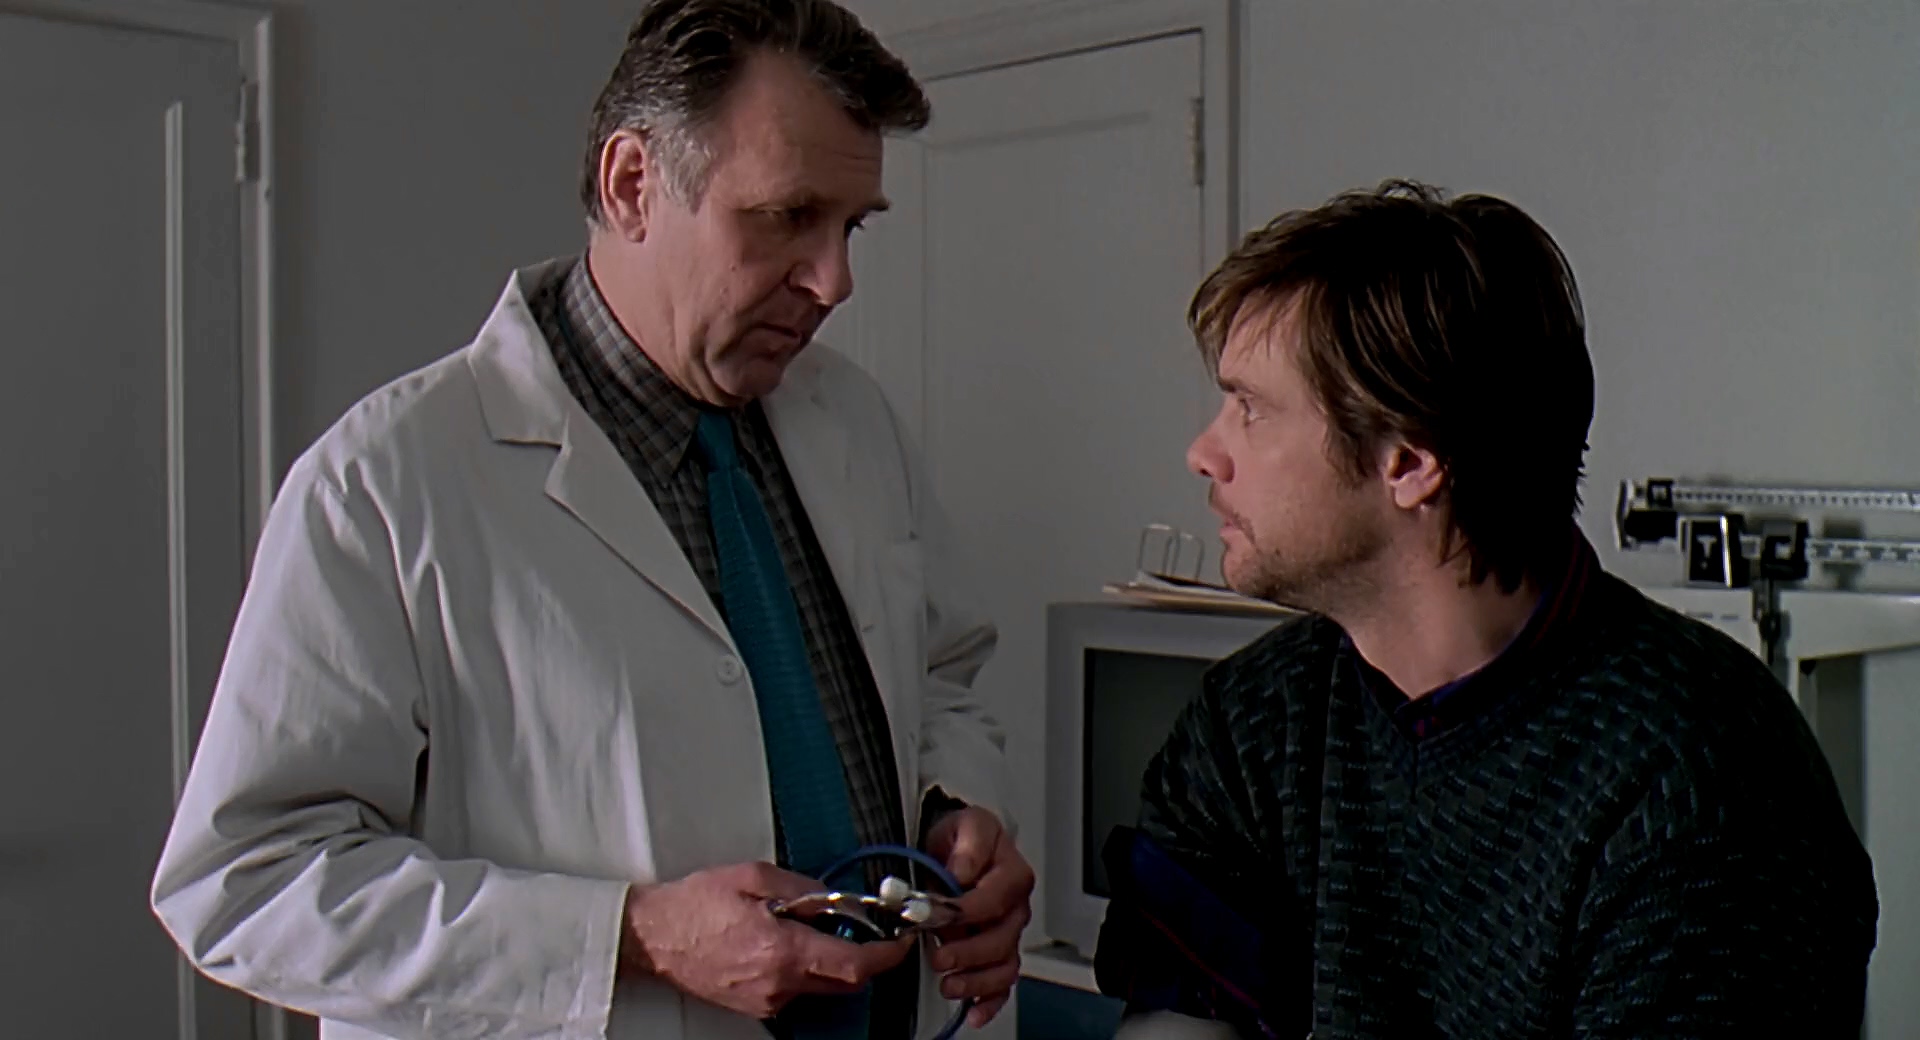 Jim Carrey and Tom Wilkinson in Eternal Sunshine of the Spotless Mind (2004)